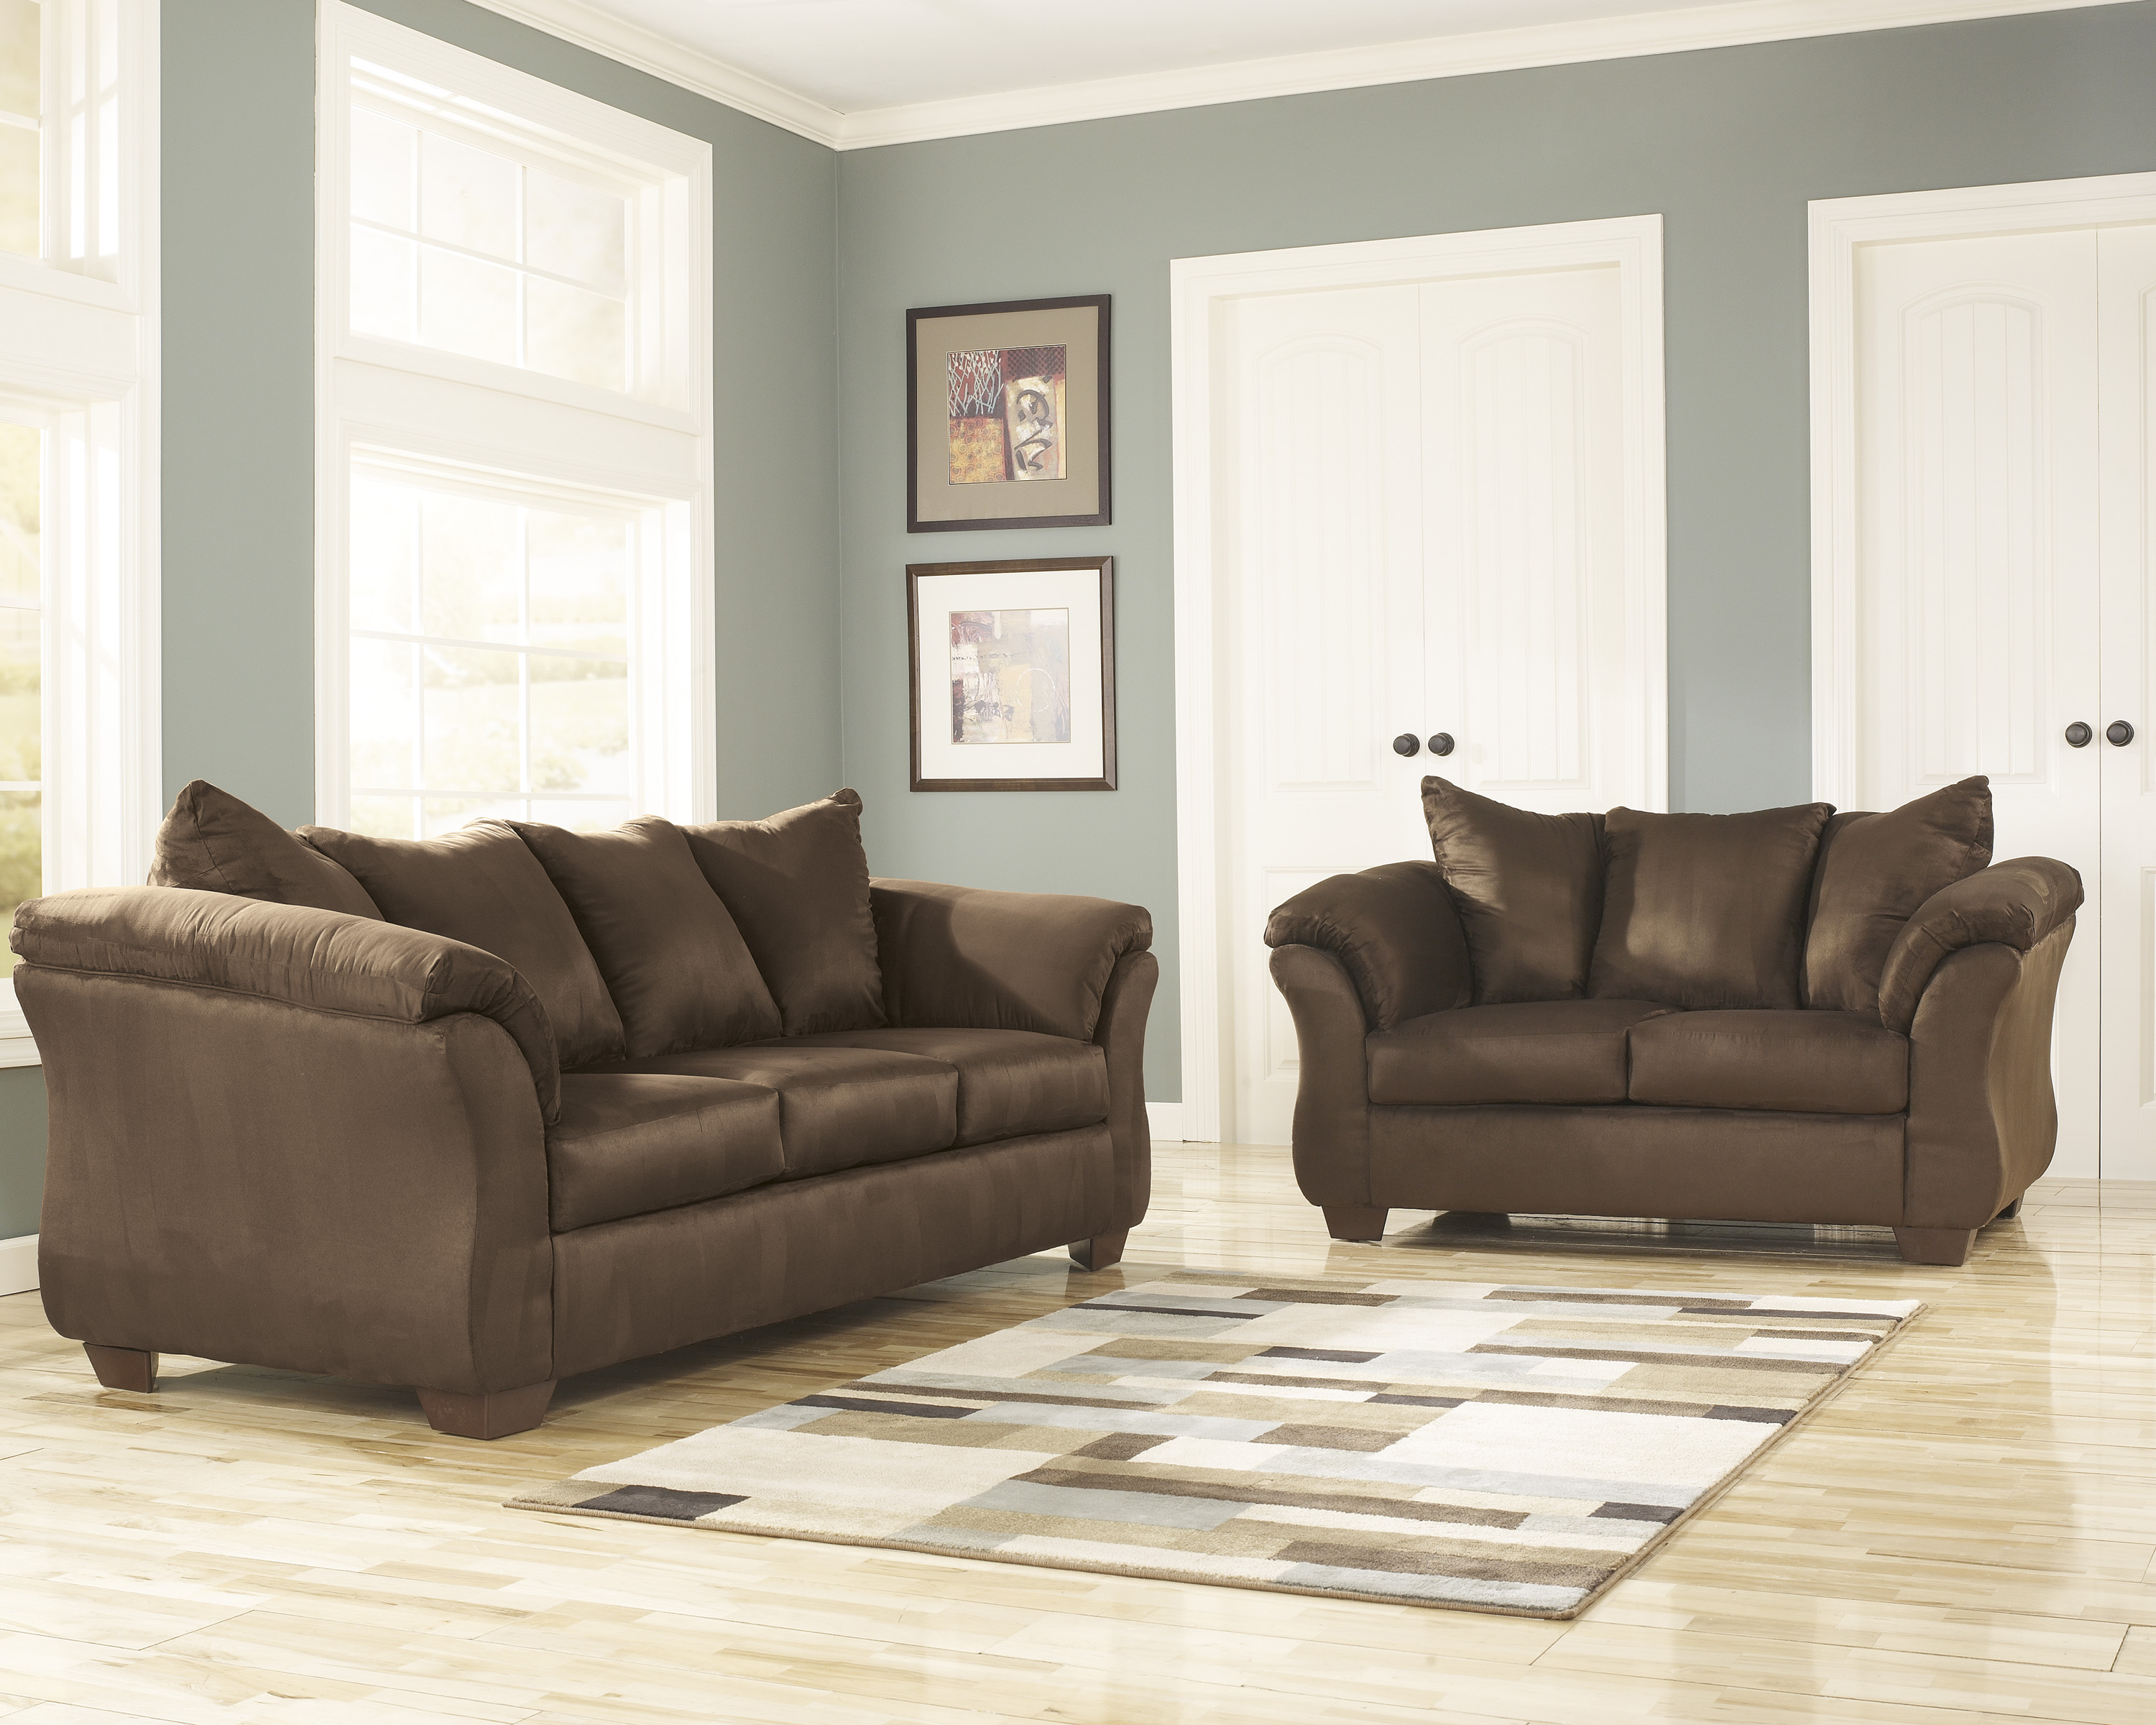 Majik Darcy Cafe Sofa And Loveseat Rent To Own Furniture In